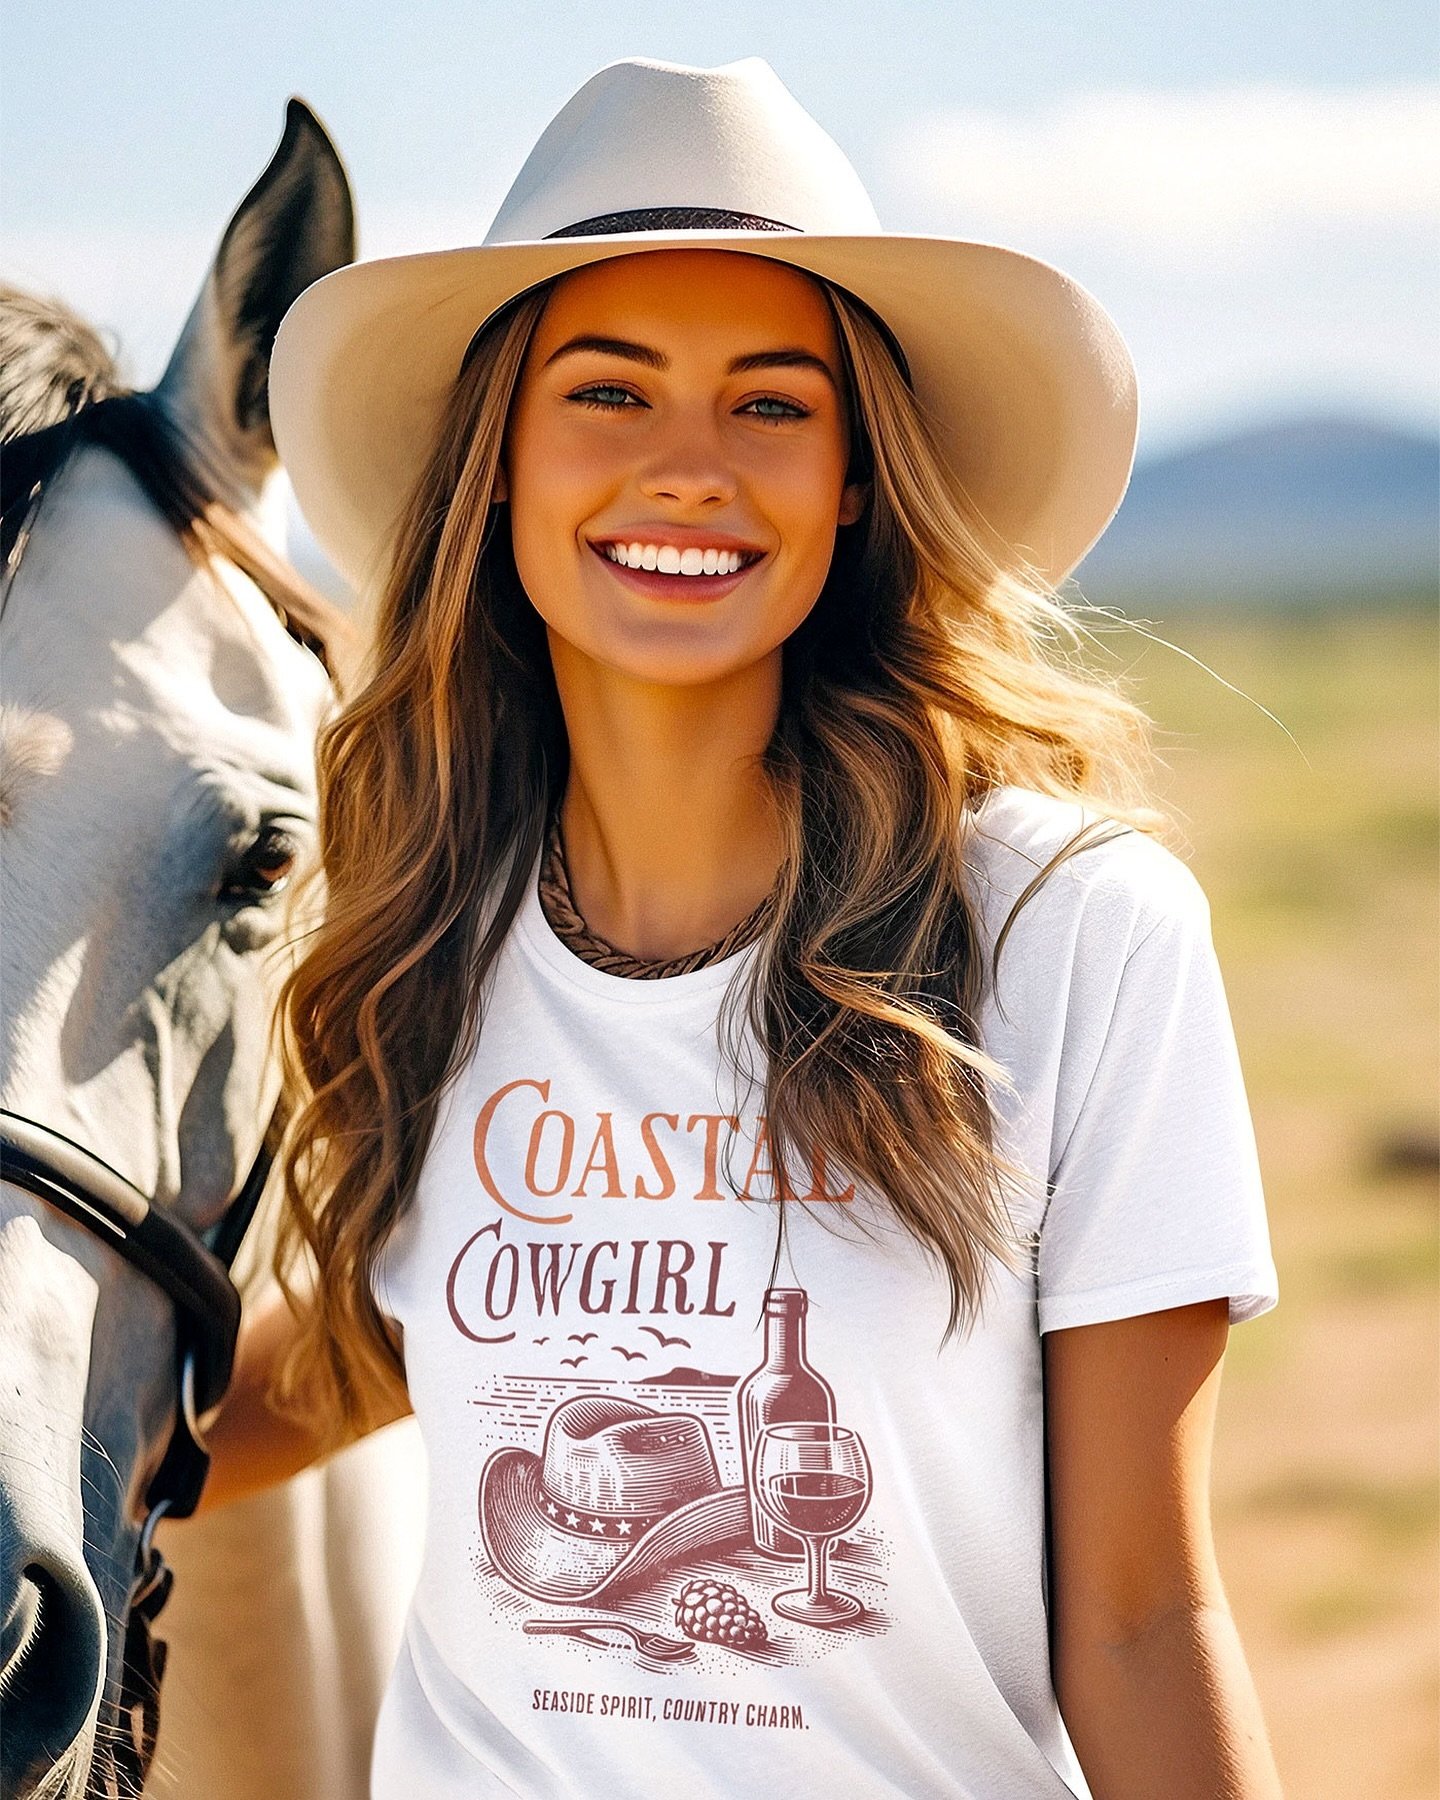 Coastal Cowgirl: Seaside Spirit, Country Charm.

Combining Seaside Spirit and Country Charm, our newest creation comes in two variations: women&rsquo;s relaxed t-shirt and women&rsquo;s fitted t-shirt. Both are made from 100% cotton, seamlessly blend